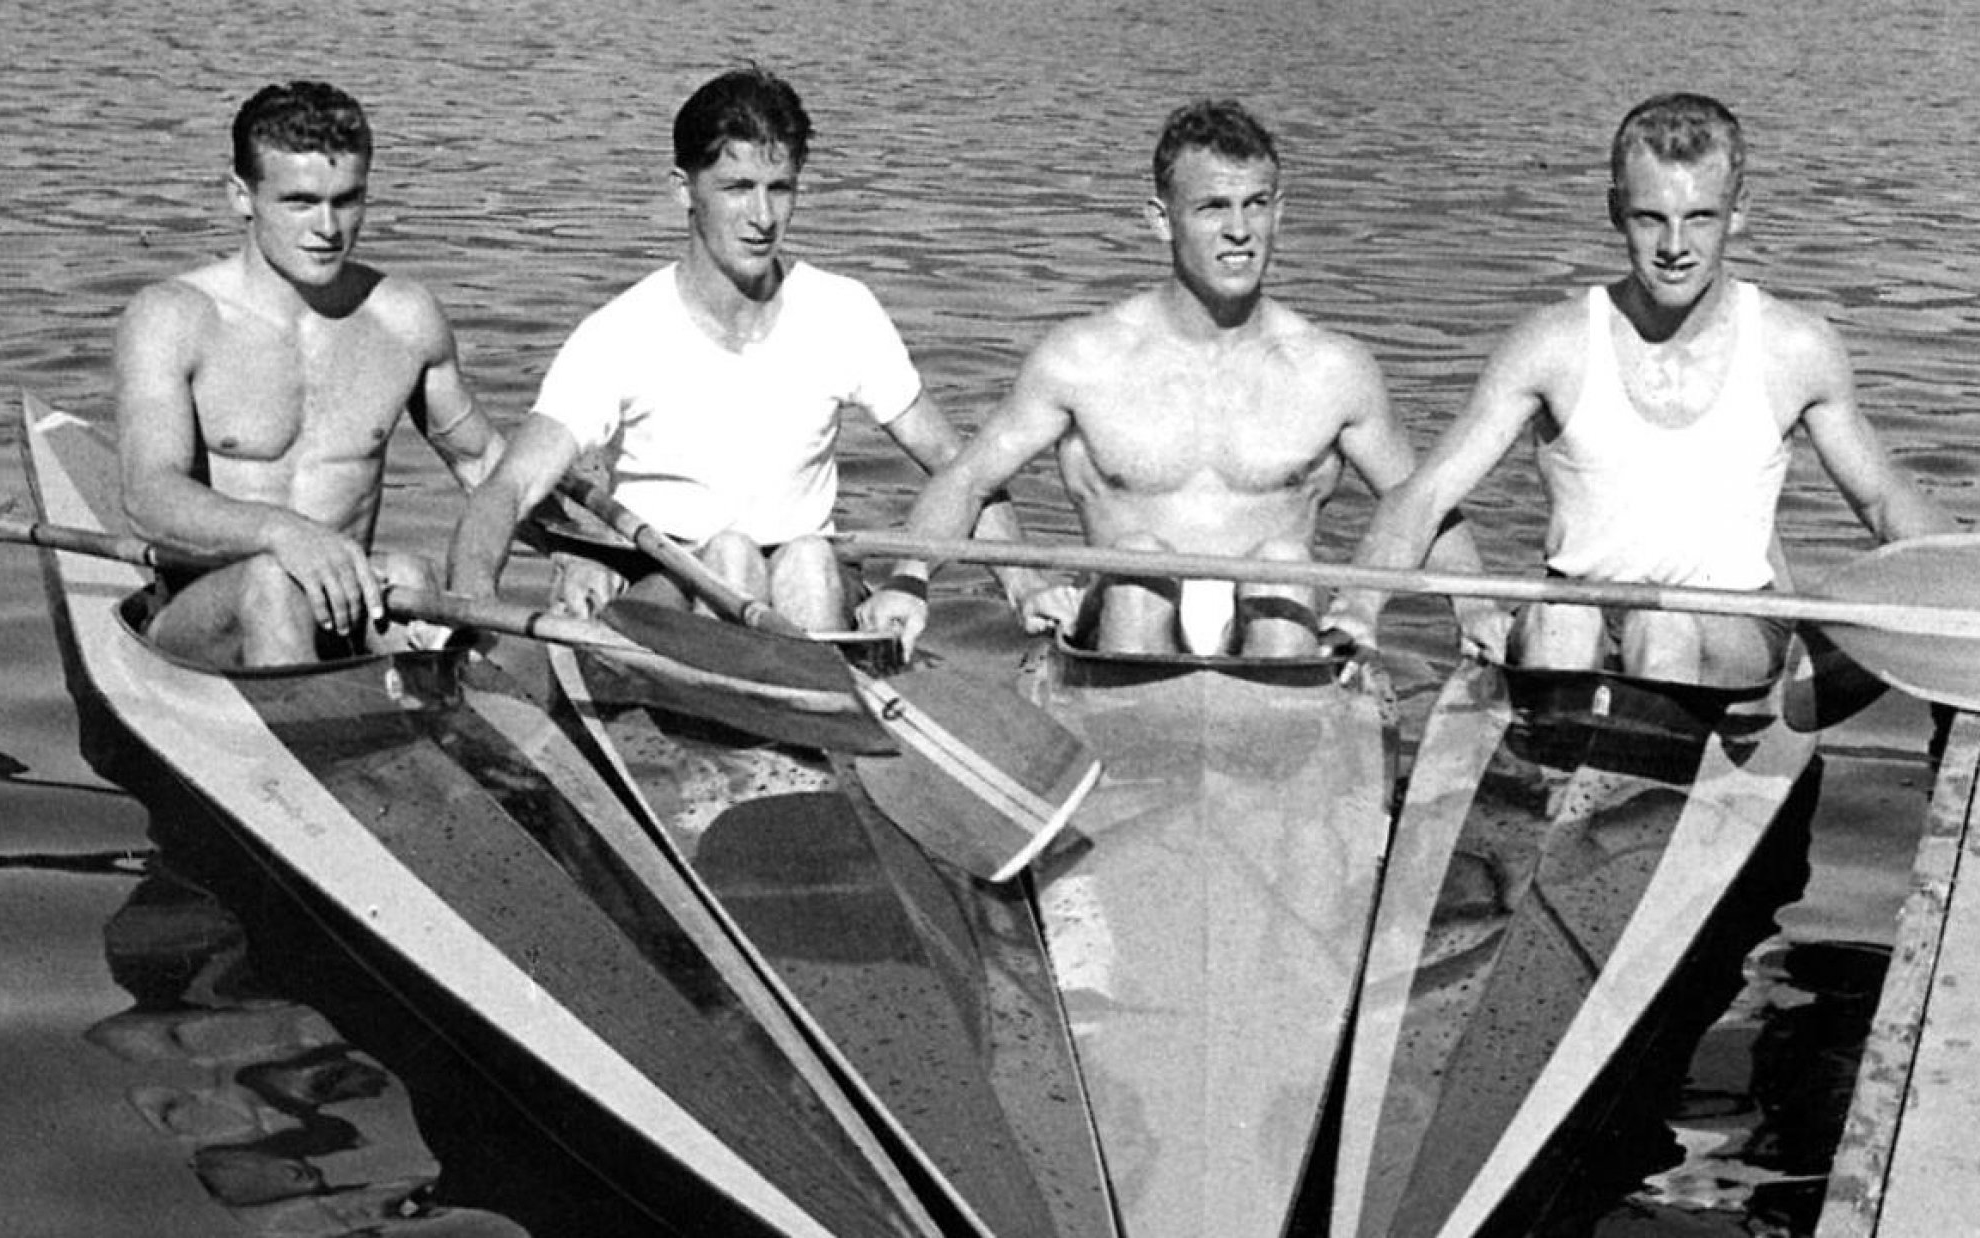 Canoeing and Kayaking in the Olympics | A Complete History of the Sport